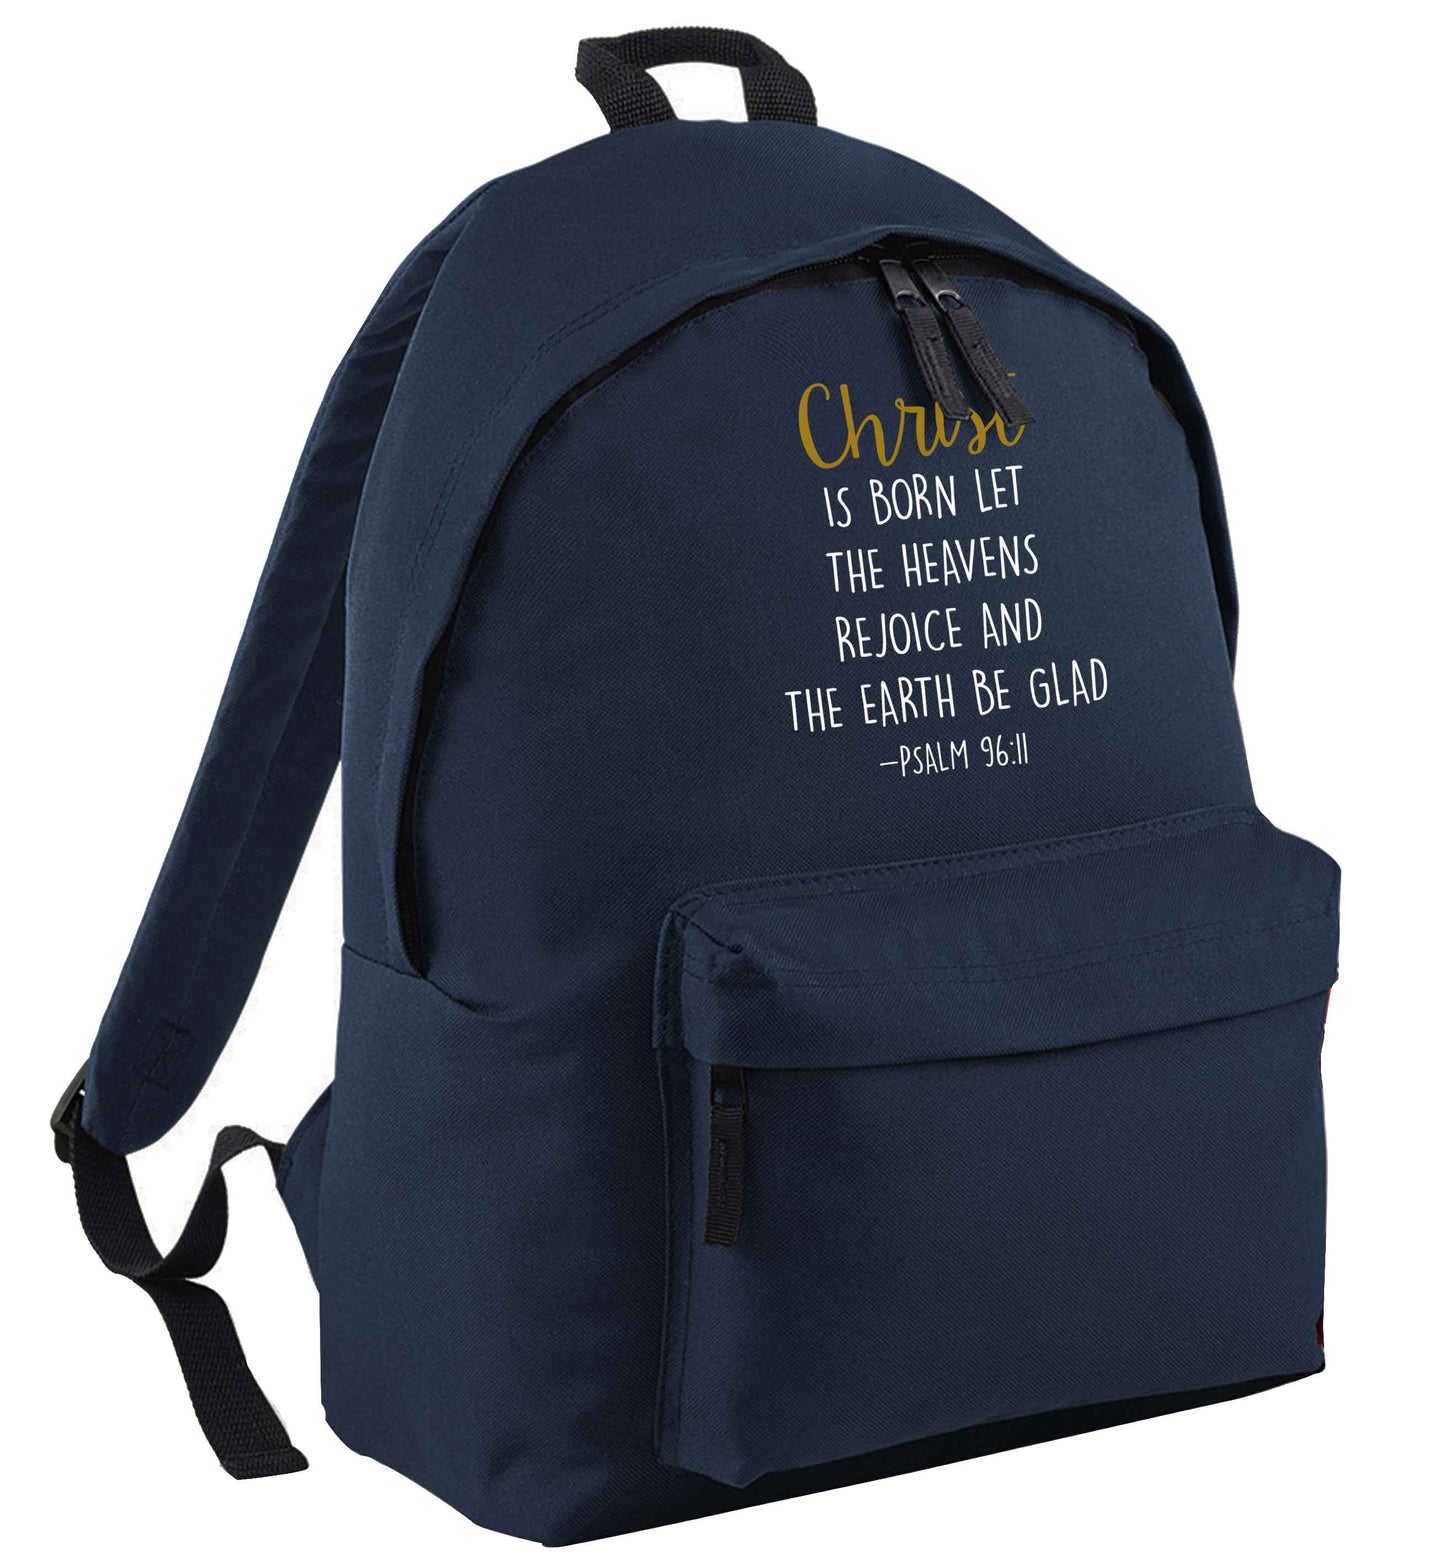 Christ is Born Psalm 96:11 navy adults backpack